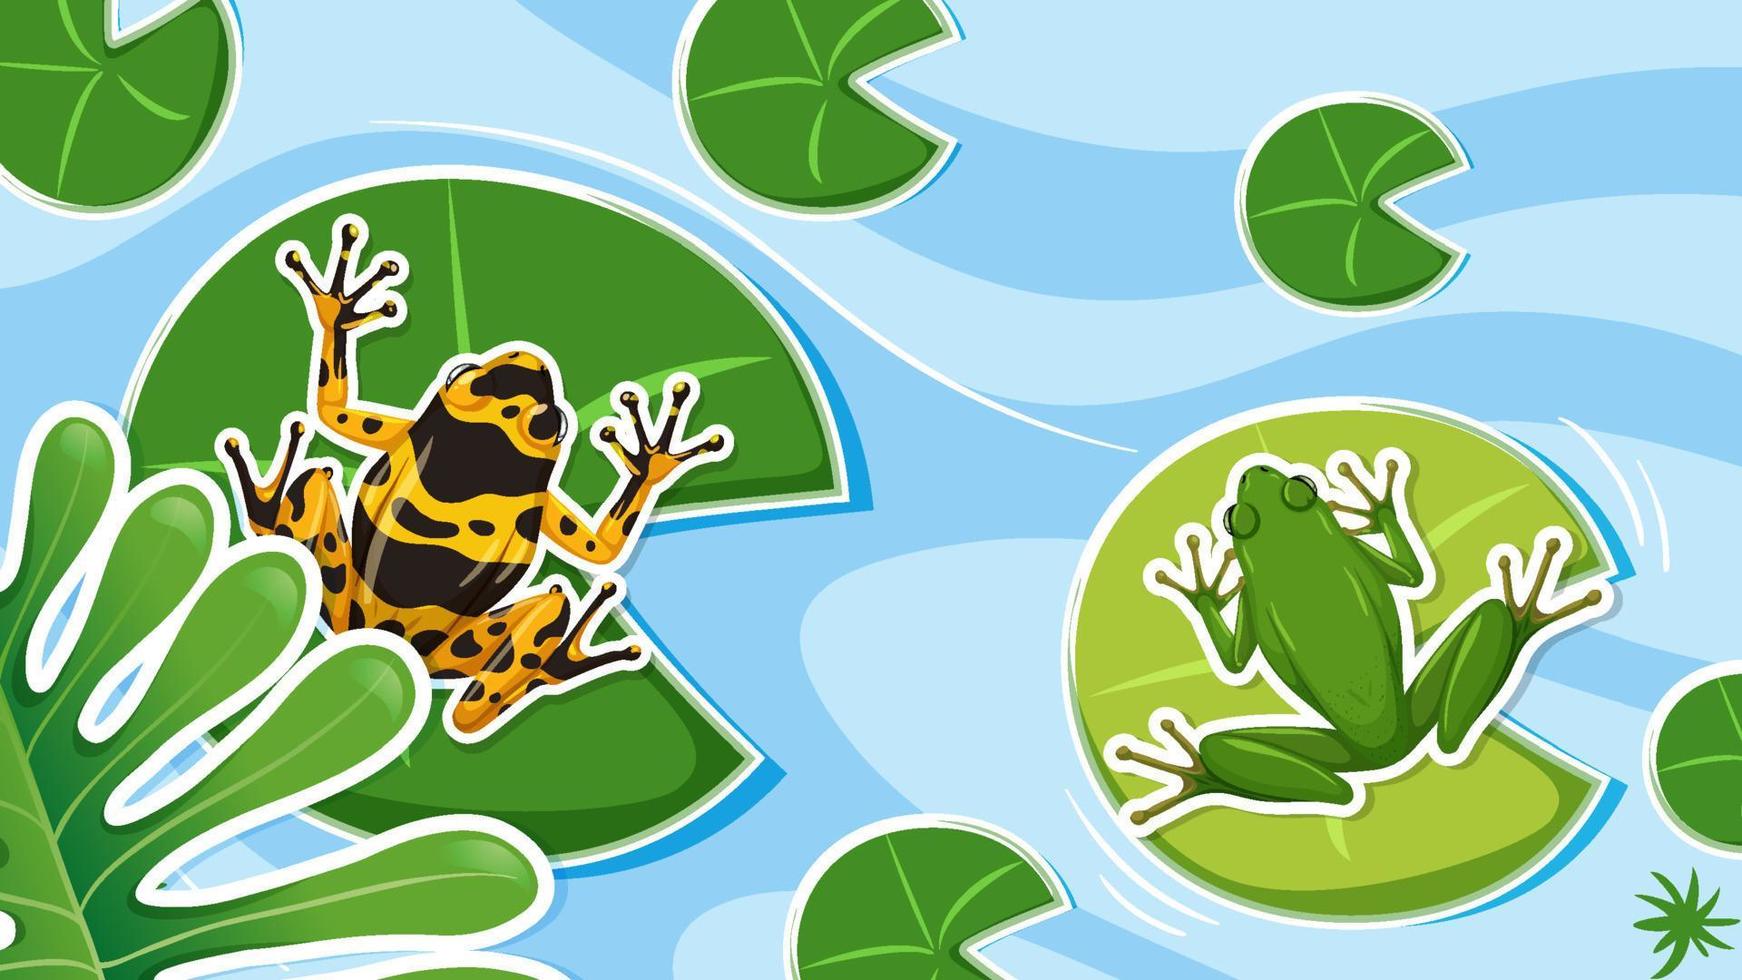 Top view frogs in the pond vector